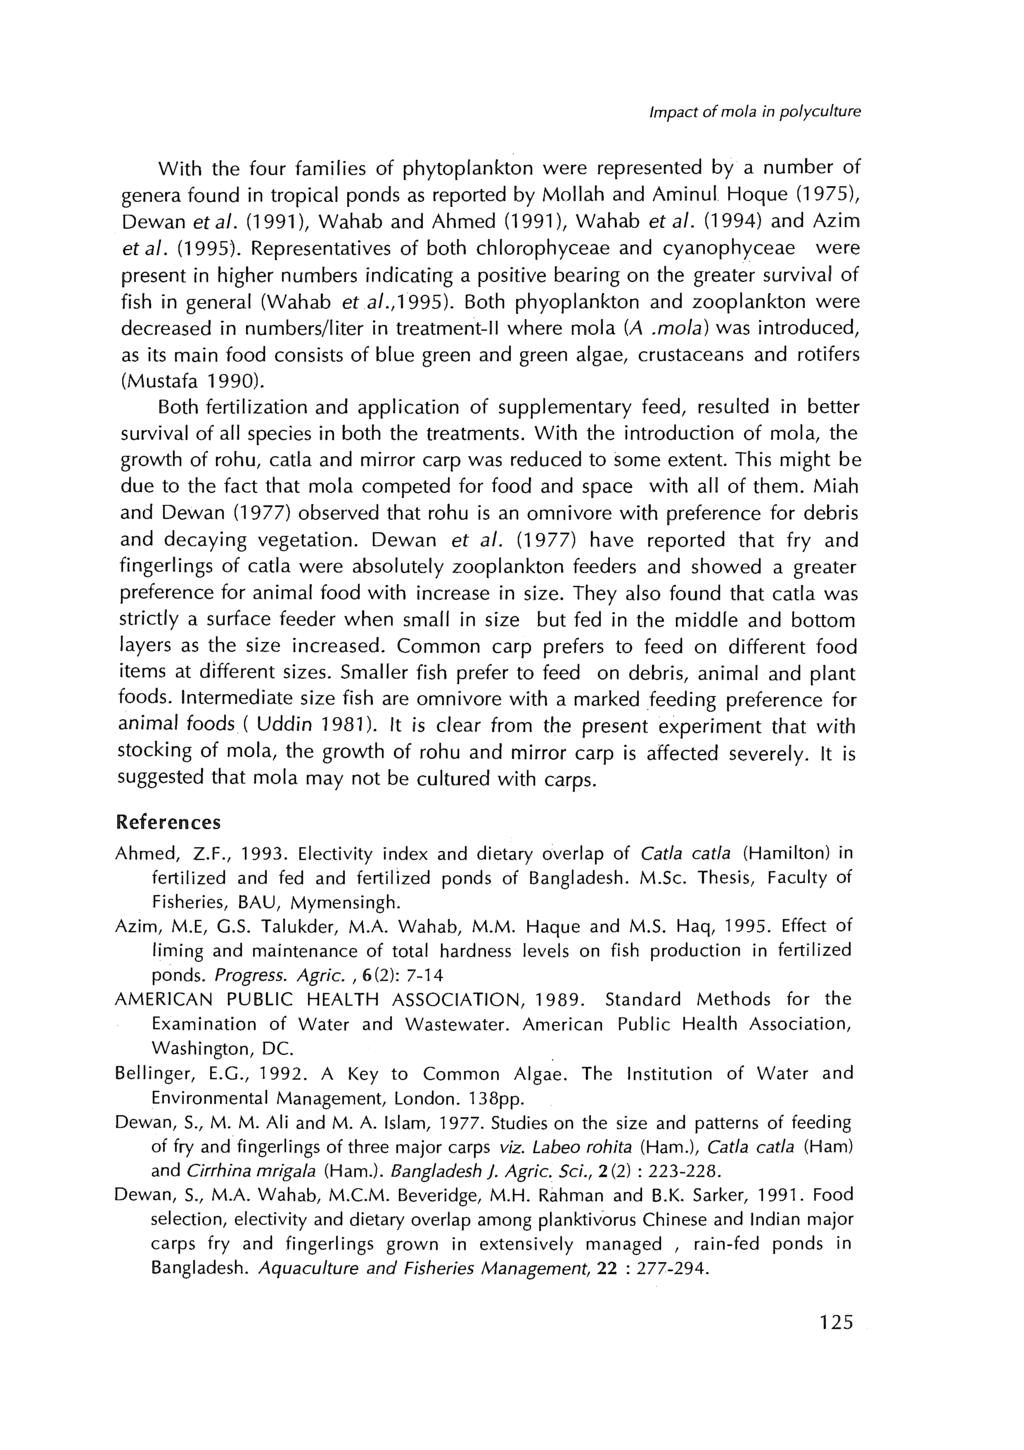 Impact of mota in polyculture With the four families of phytoplankton were represented by a number of genera found in tropical ponds as reported by Mollah and Aminul. Hoque (1975), Dewan eta/.